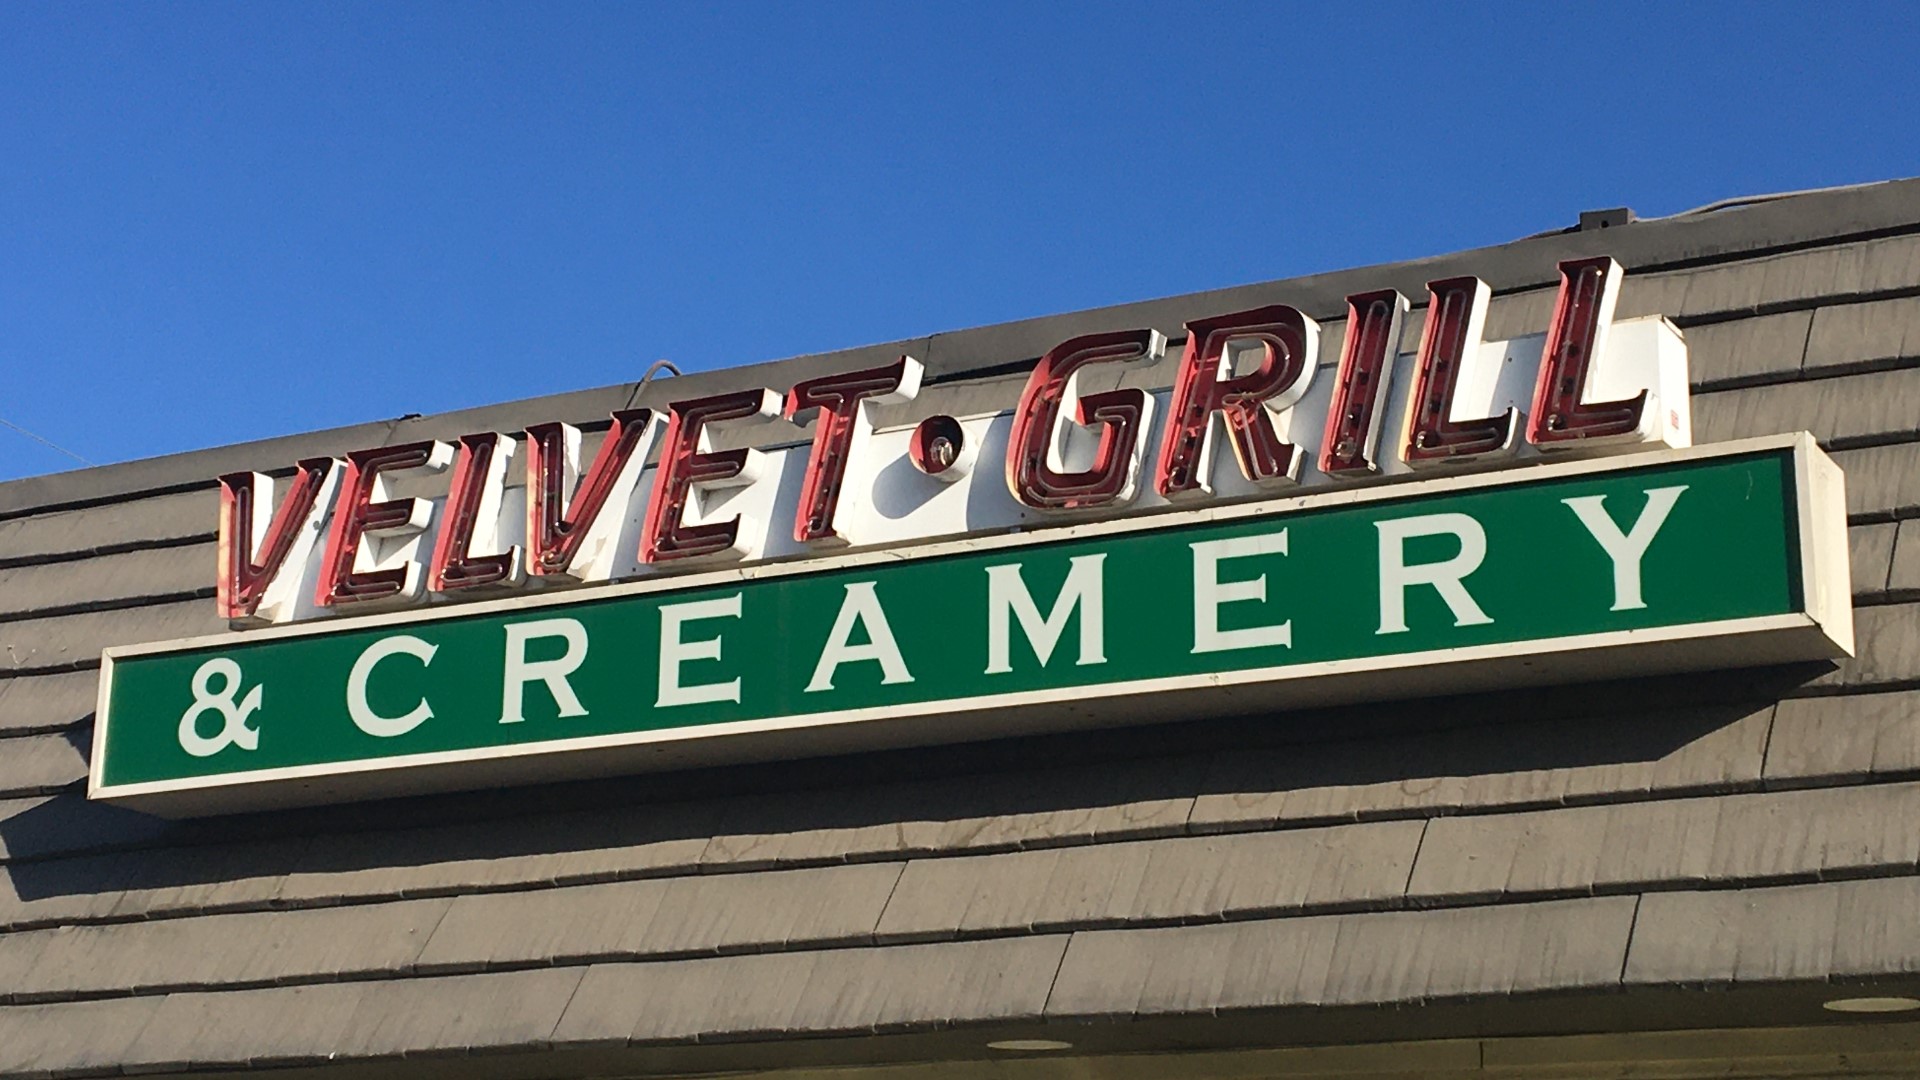 Each of Velvet Grill & Creamery restaurants in Modesto have been fined $1,000 a day for serving customers indoors before the county allowed indoor dining.